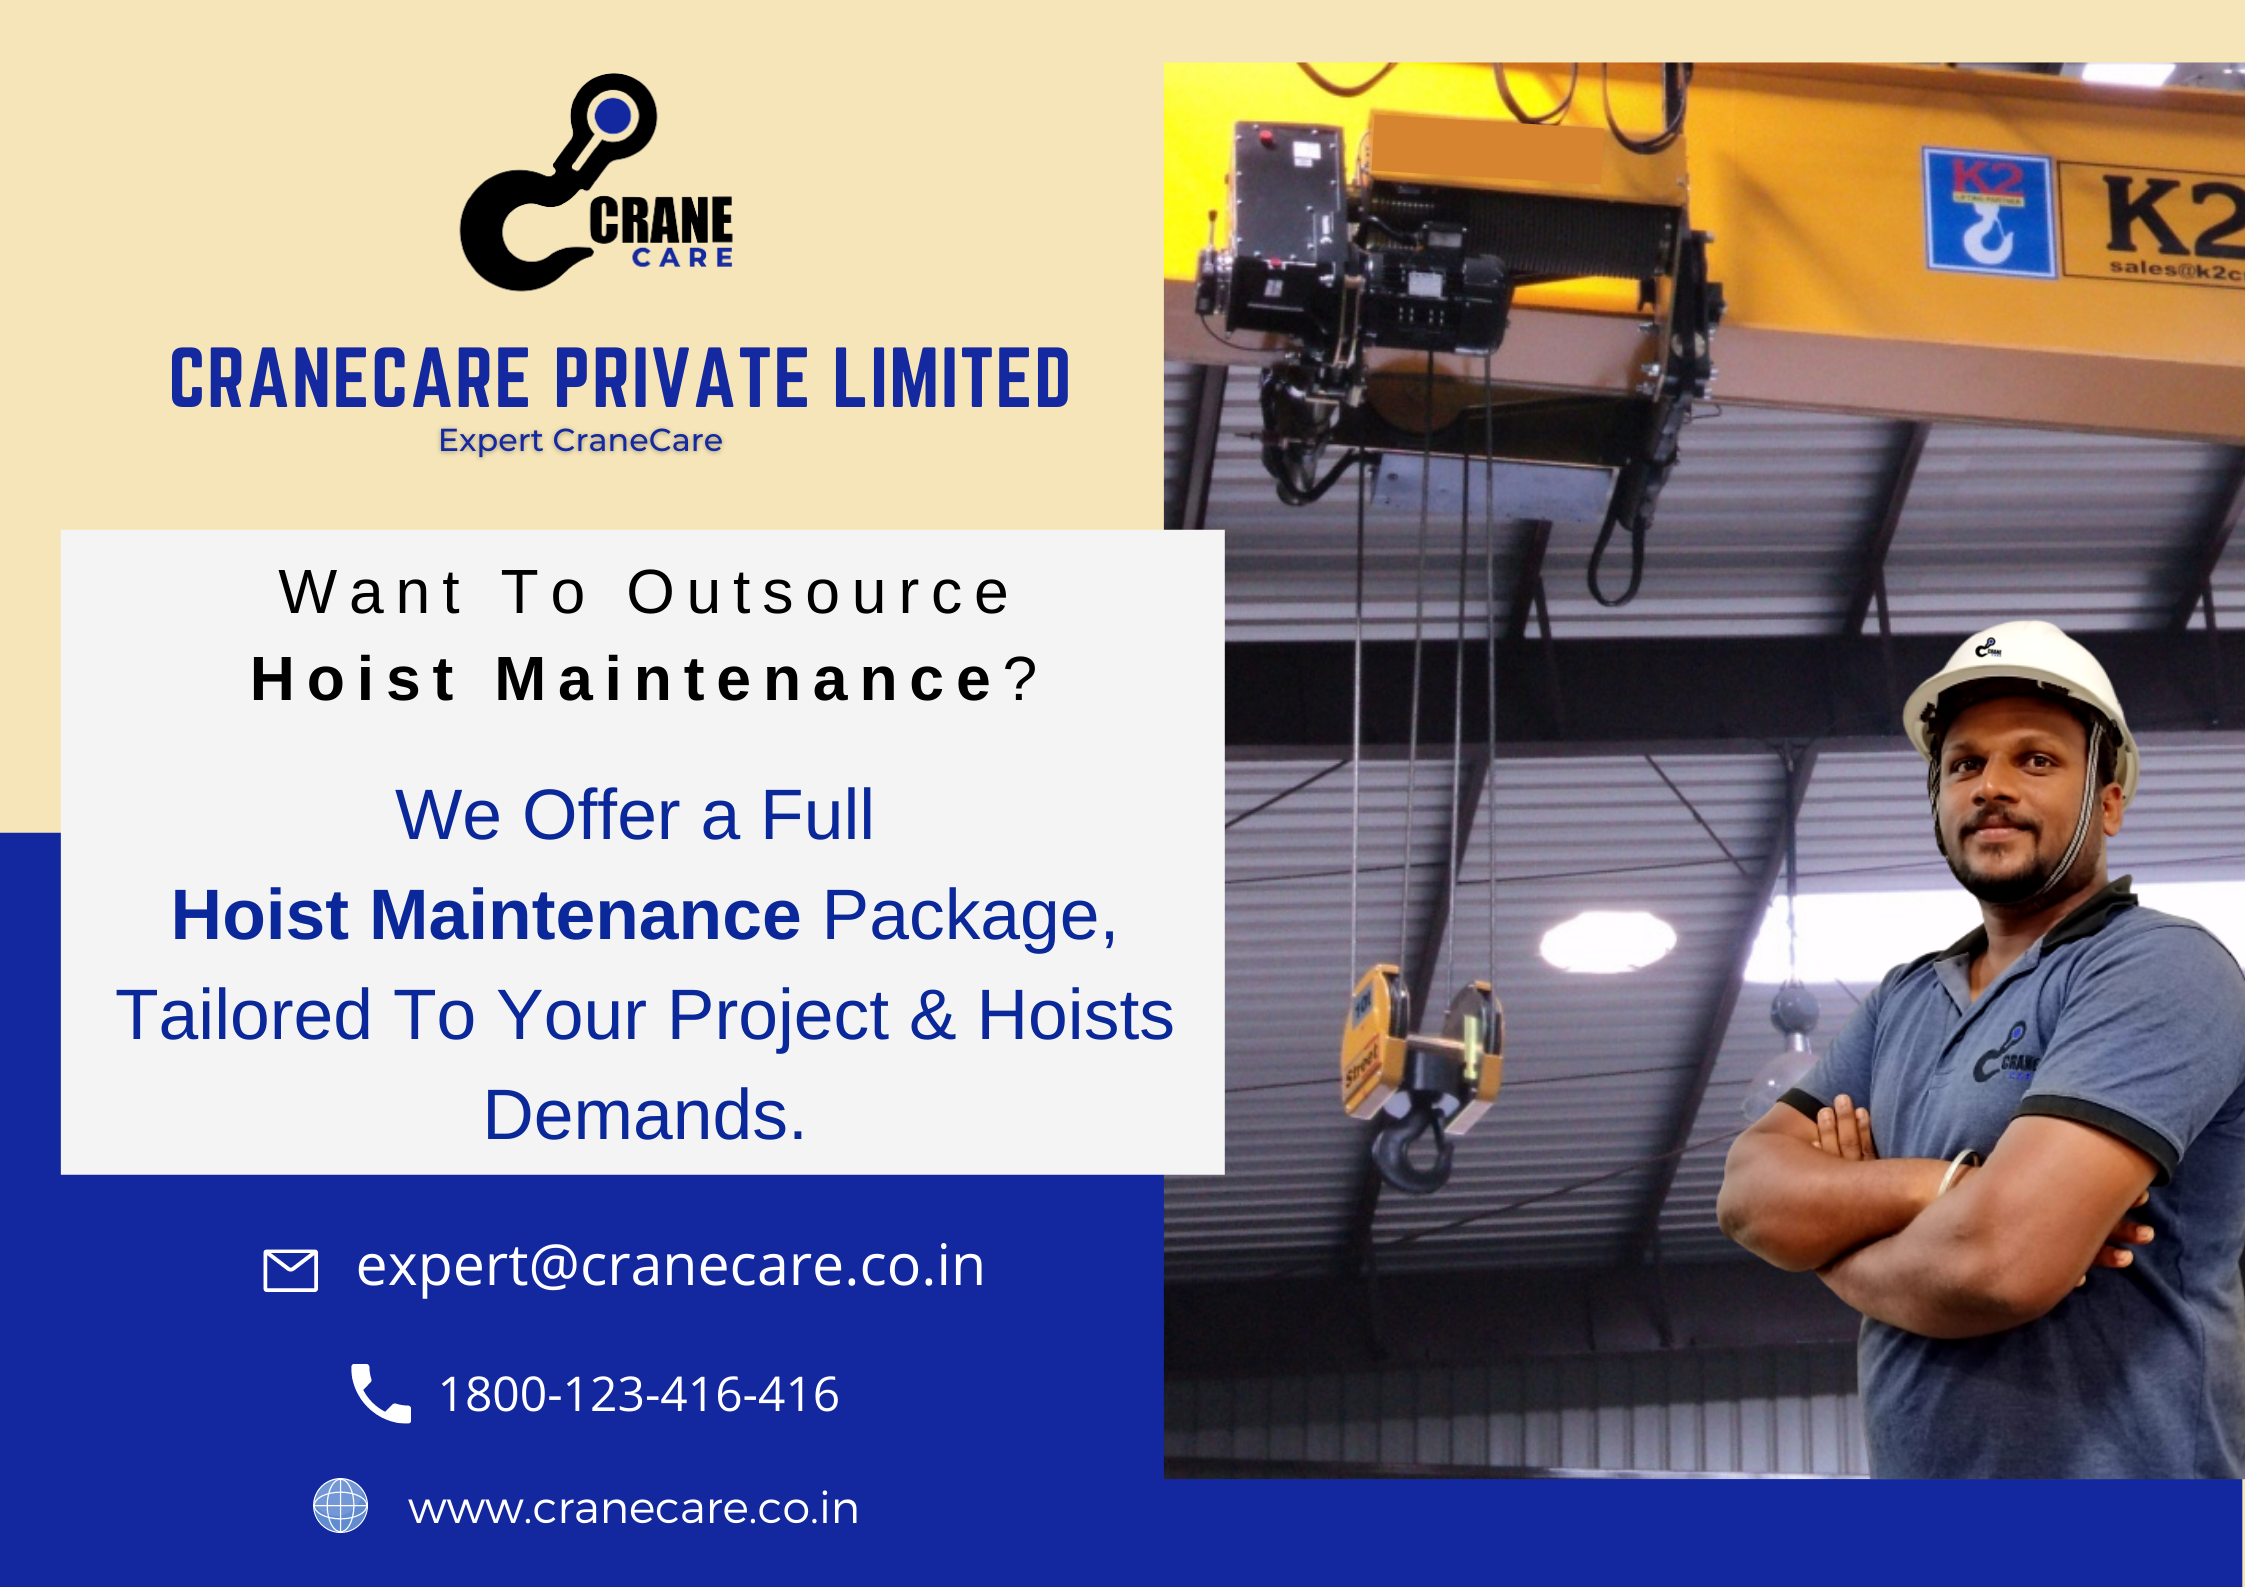 Want To outsource Hoist Maintenance?